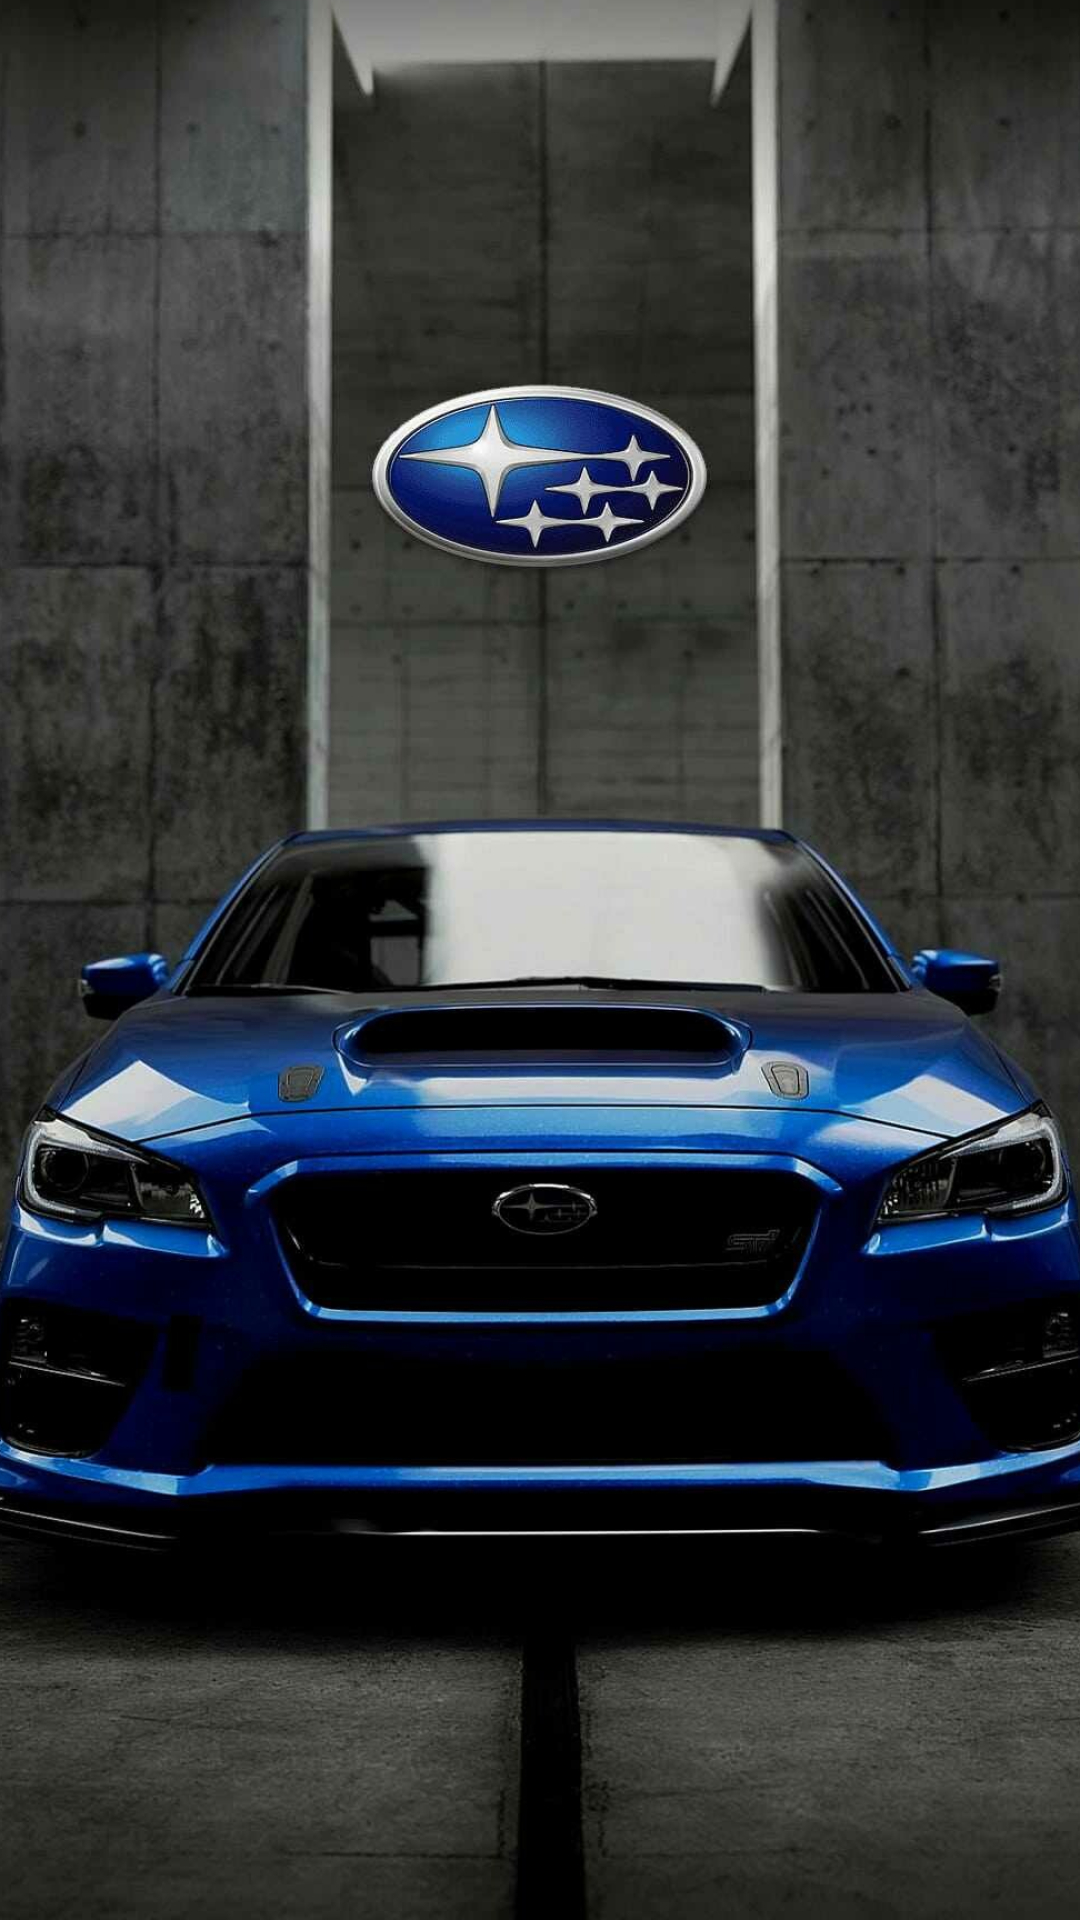 Subaru: The horizontal position of the engine helps reduce vibrations, which makes the cars run more smoothly and efficiently. 1080x1920 Full HD Background.